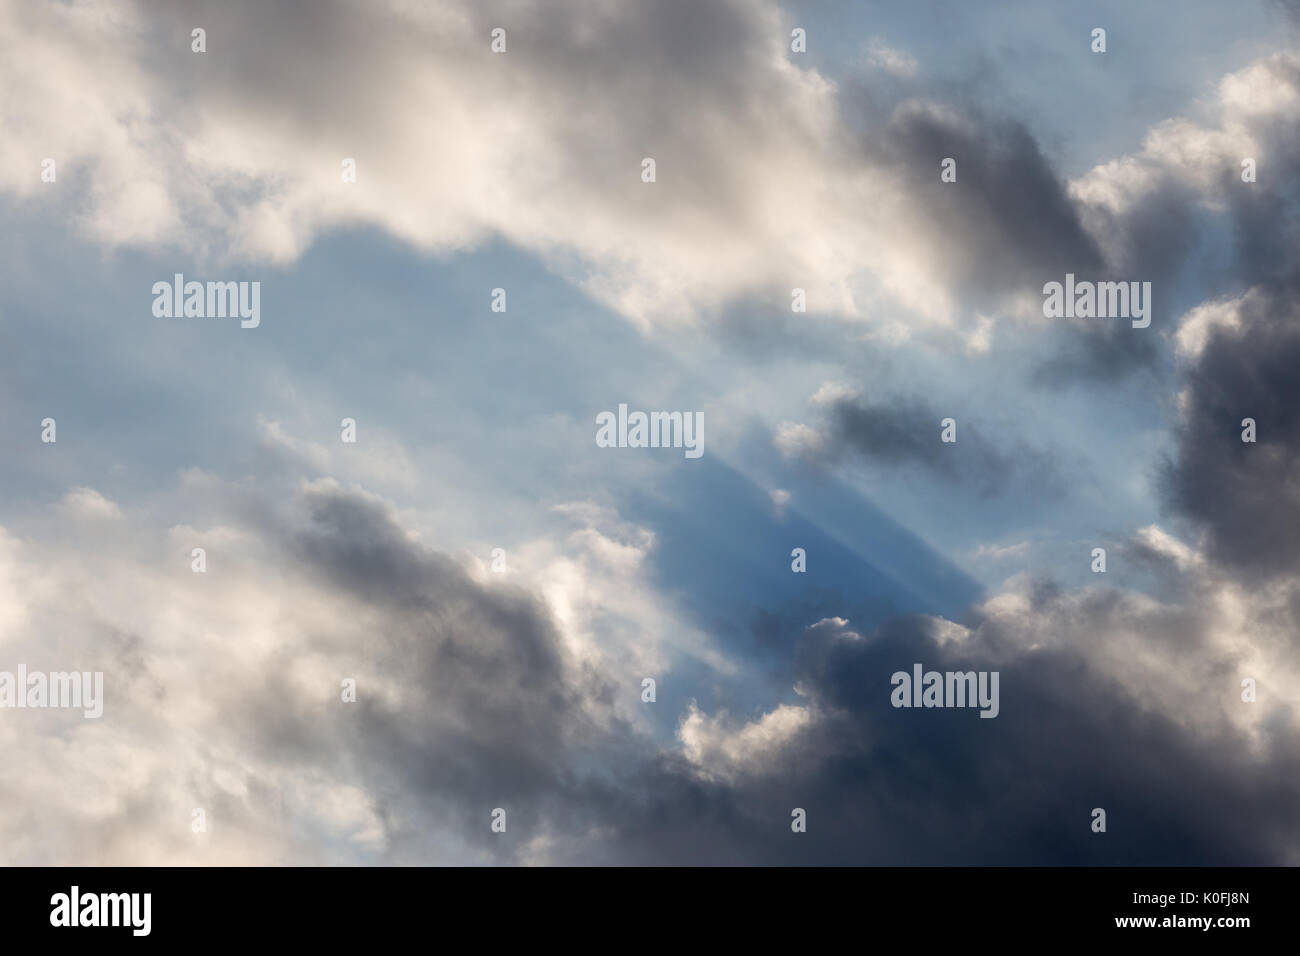 A close view of clouds with sun rays coming out through them Stock Photo